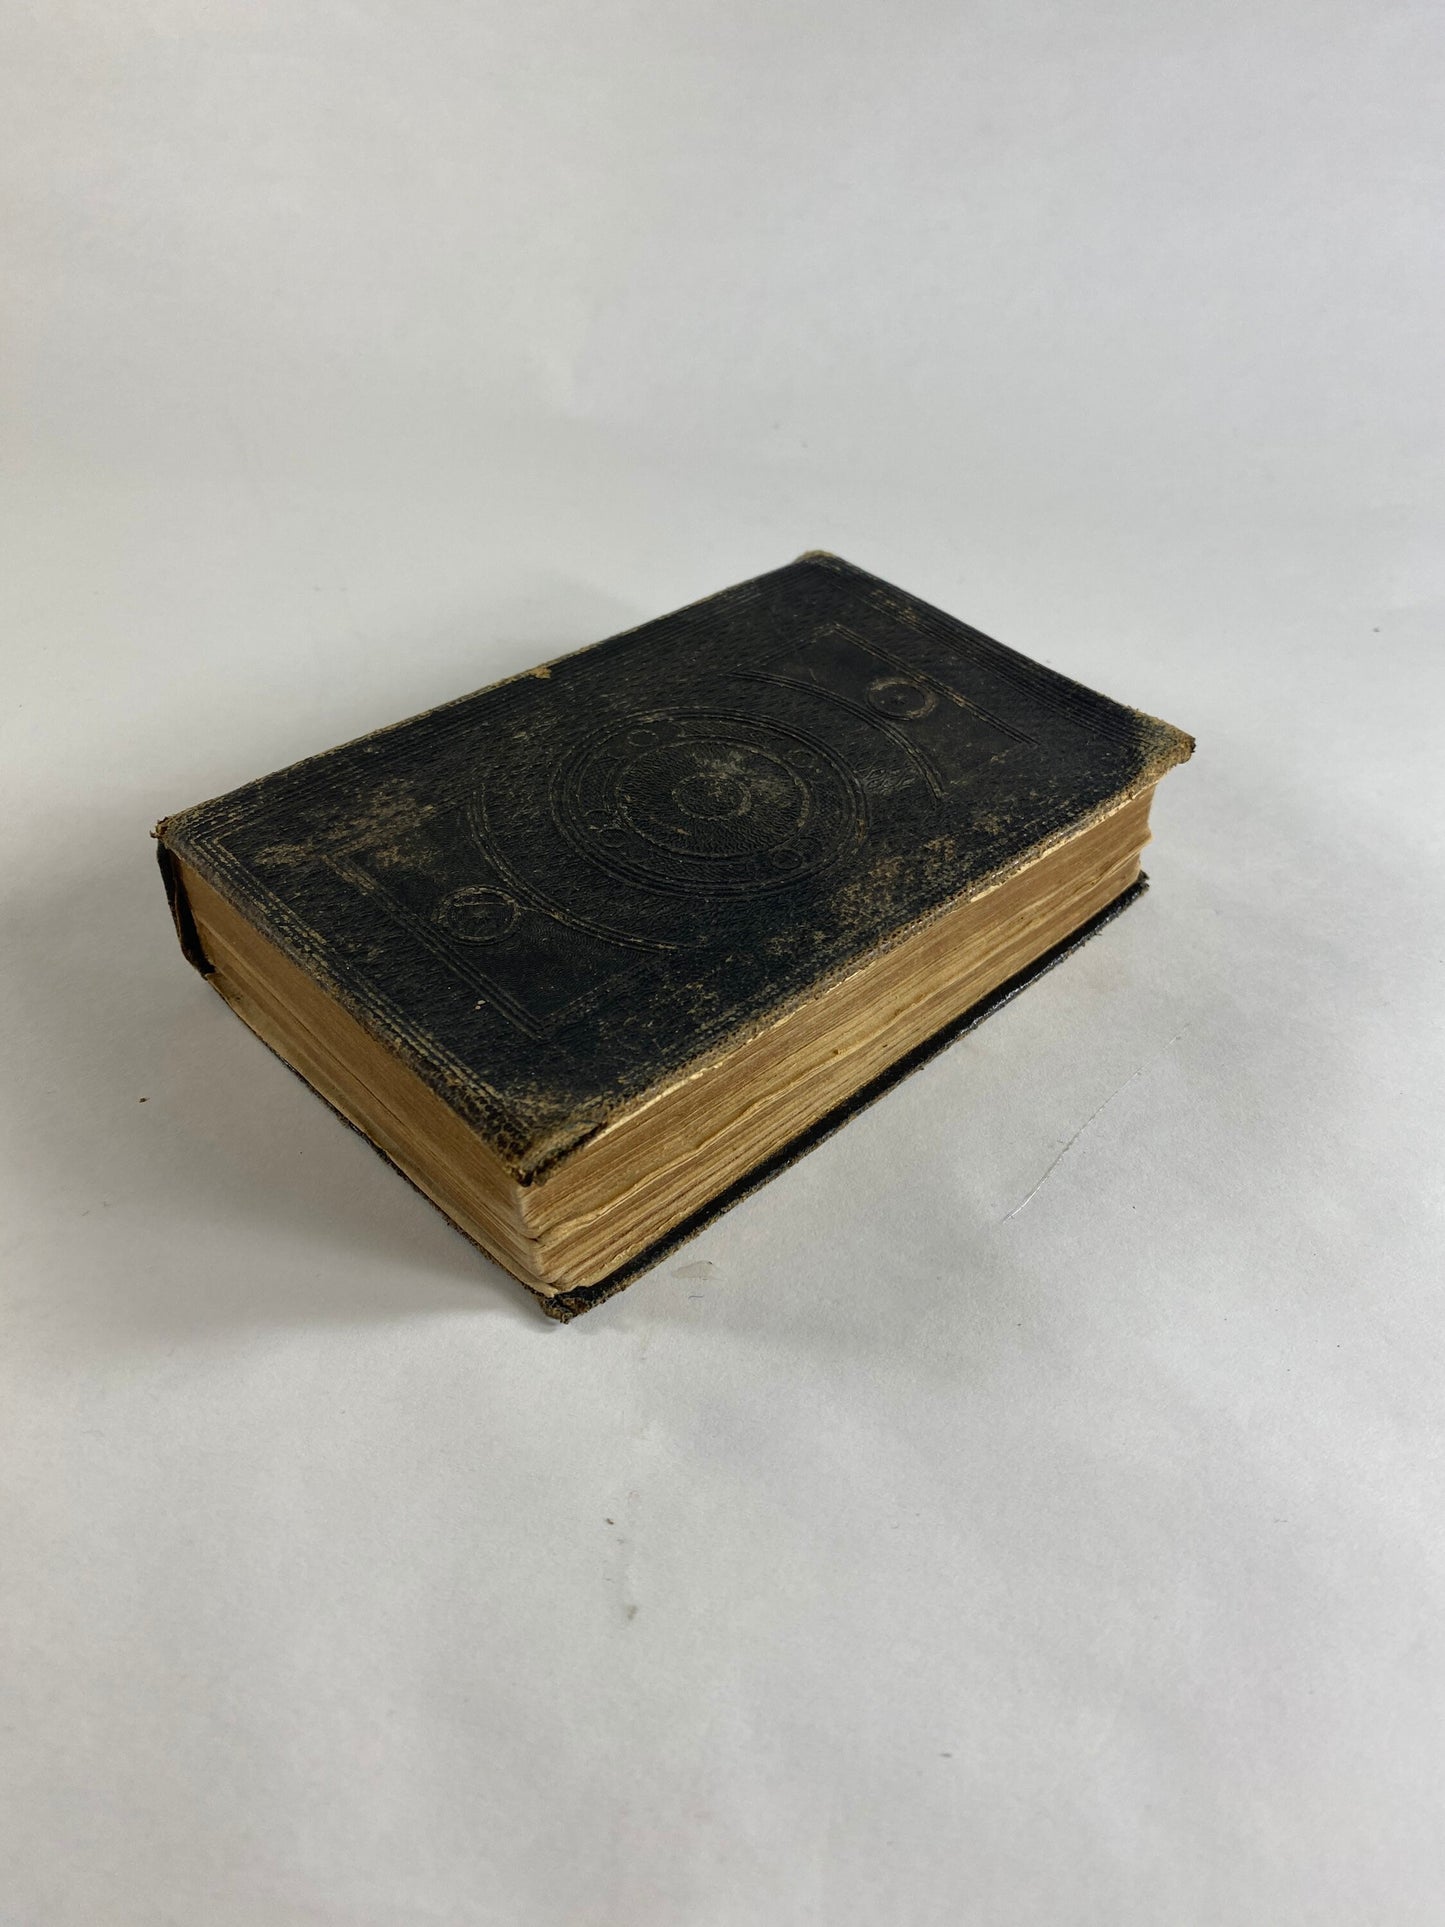 1850 Holy Bible Oxford with worn leather cover London incomplete printing Old New Testament Jesus Christ. Small miniature book decor